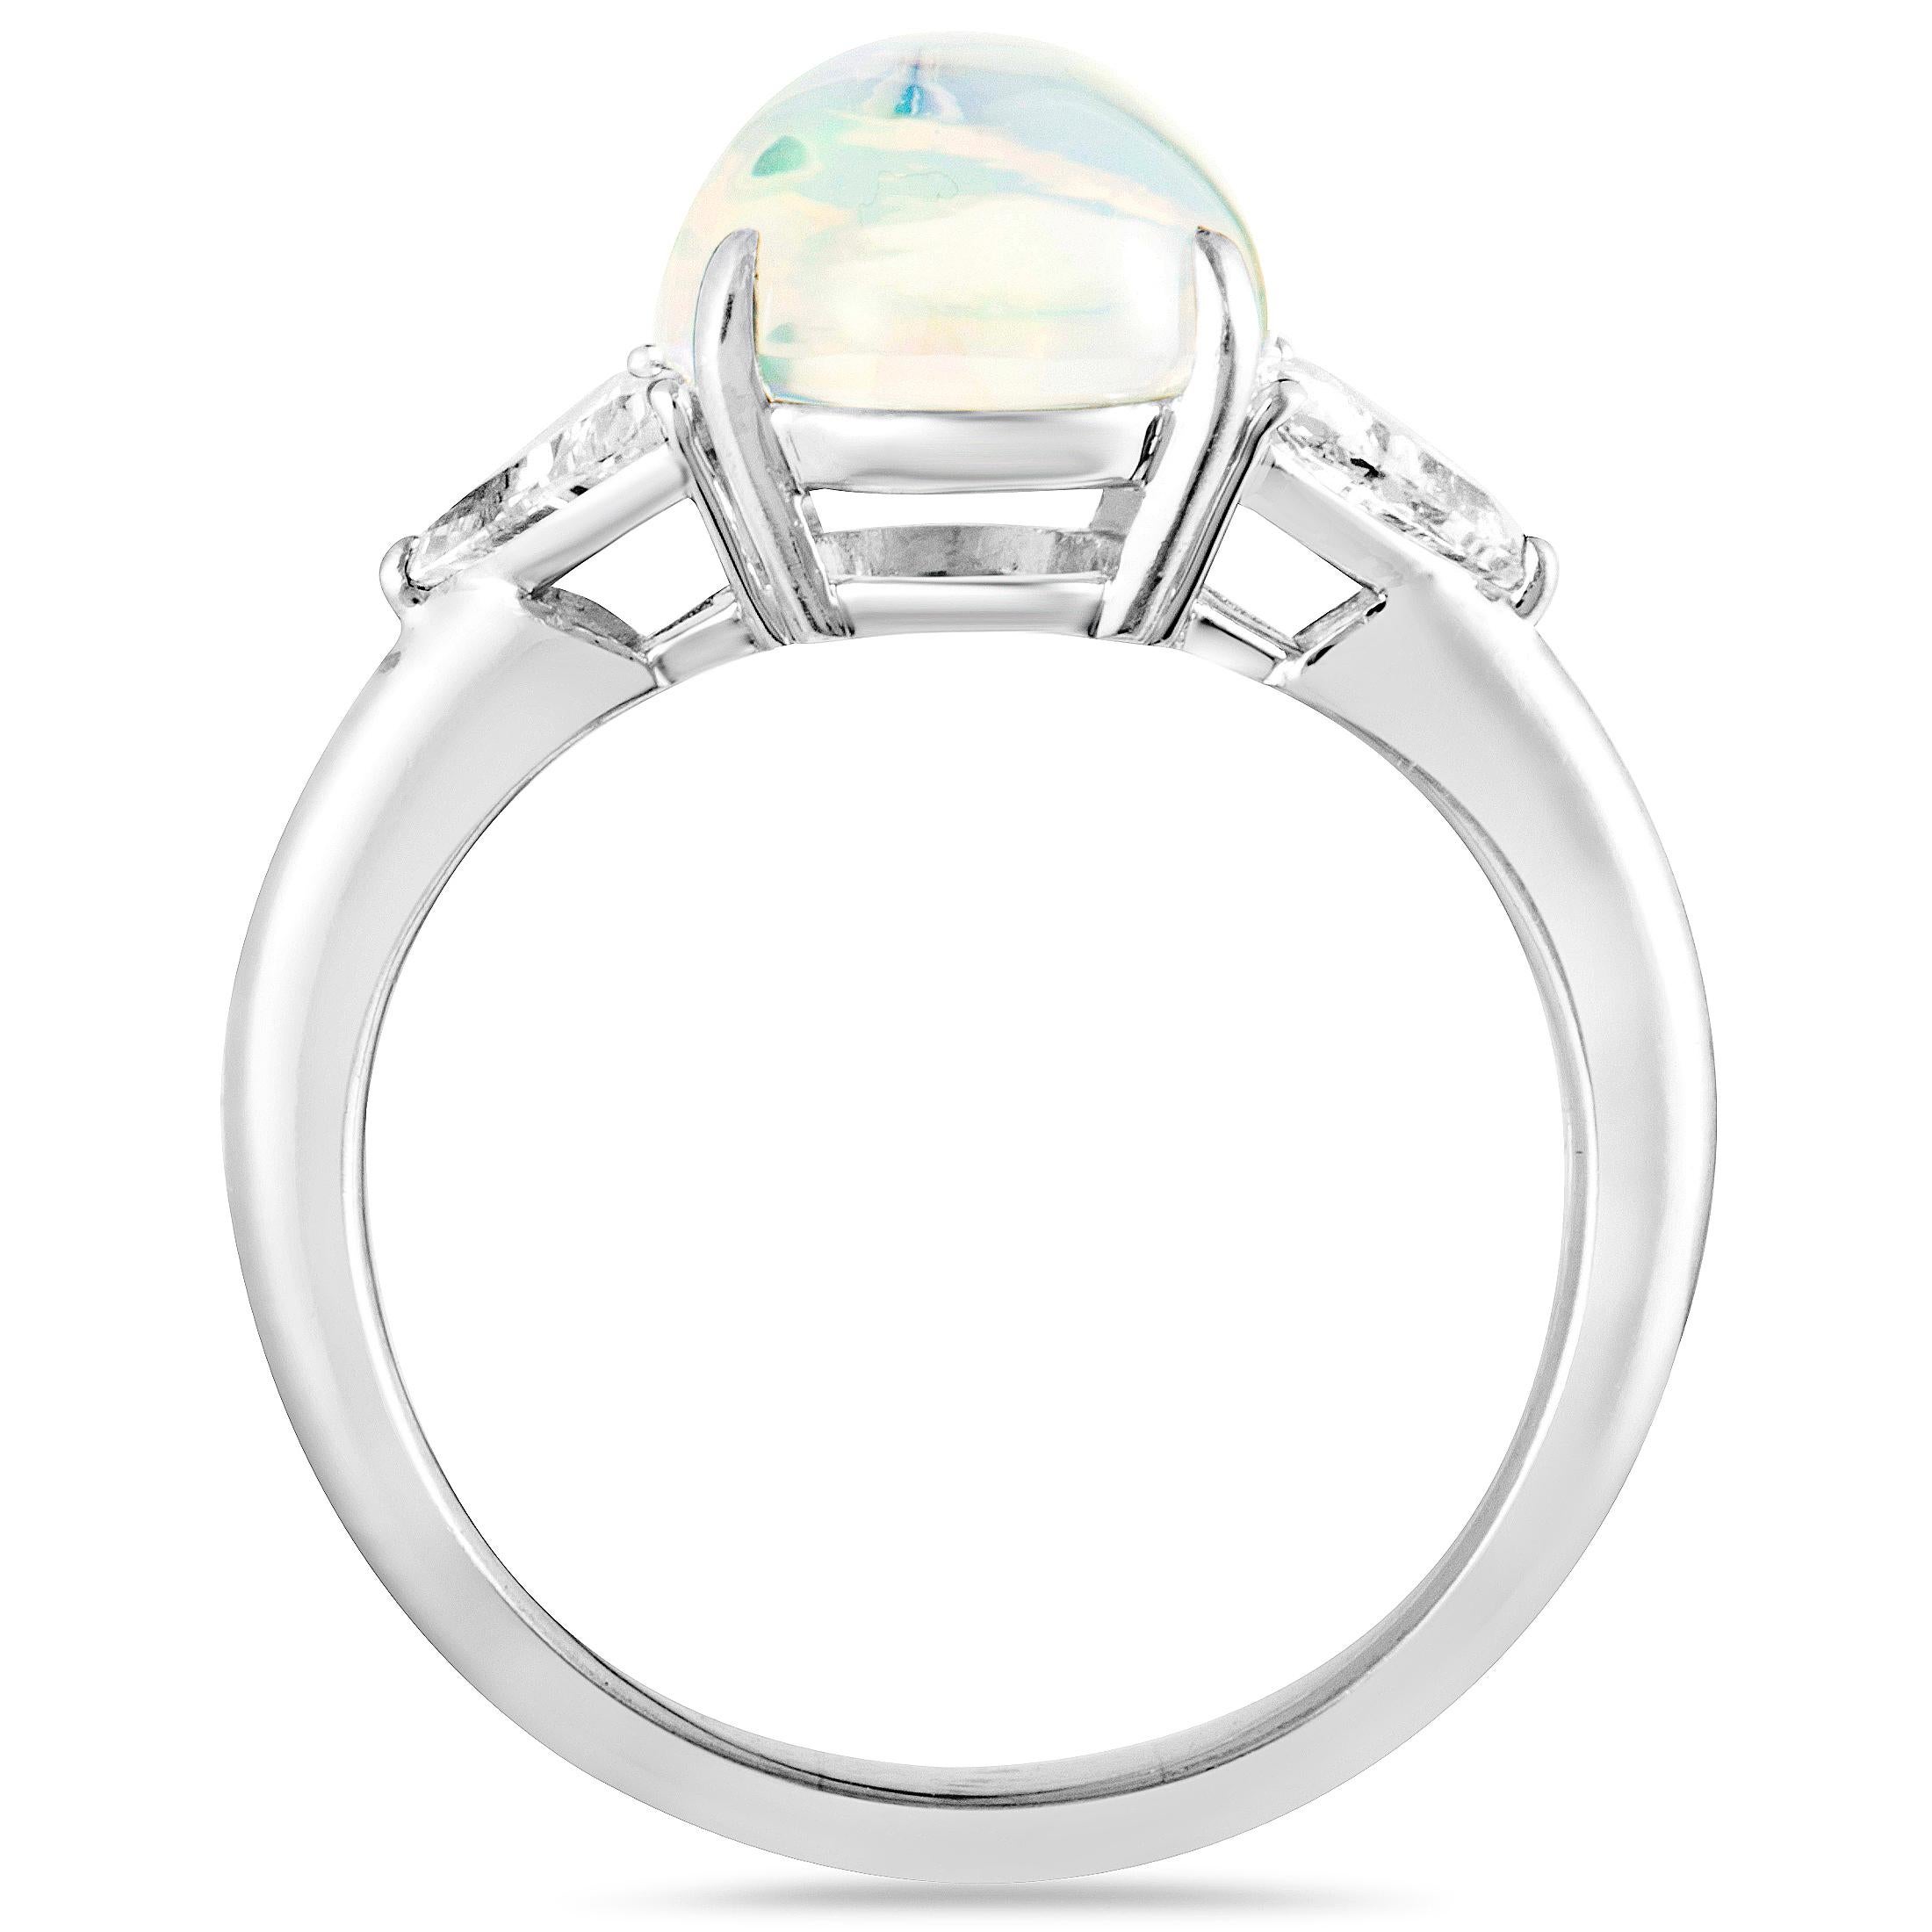 An exceptionally elegant look is achieved in this beautiful jewelry piece by combining the sublime allure of opal with the scintillating brilliance of diamonds. The ring is expertly crafted from luxurious platinum and it is set with an opal that